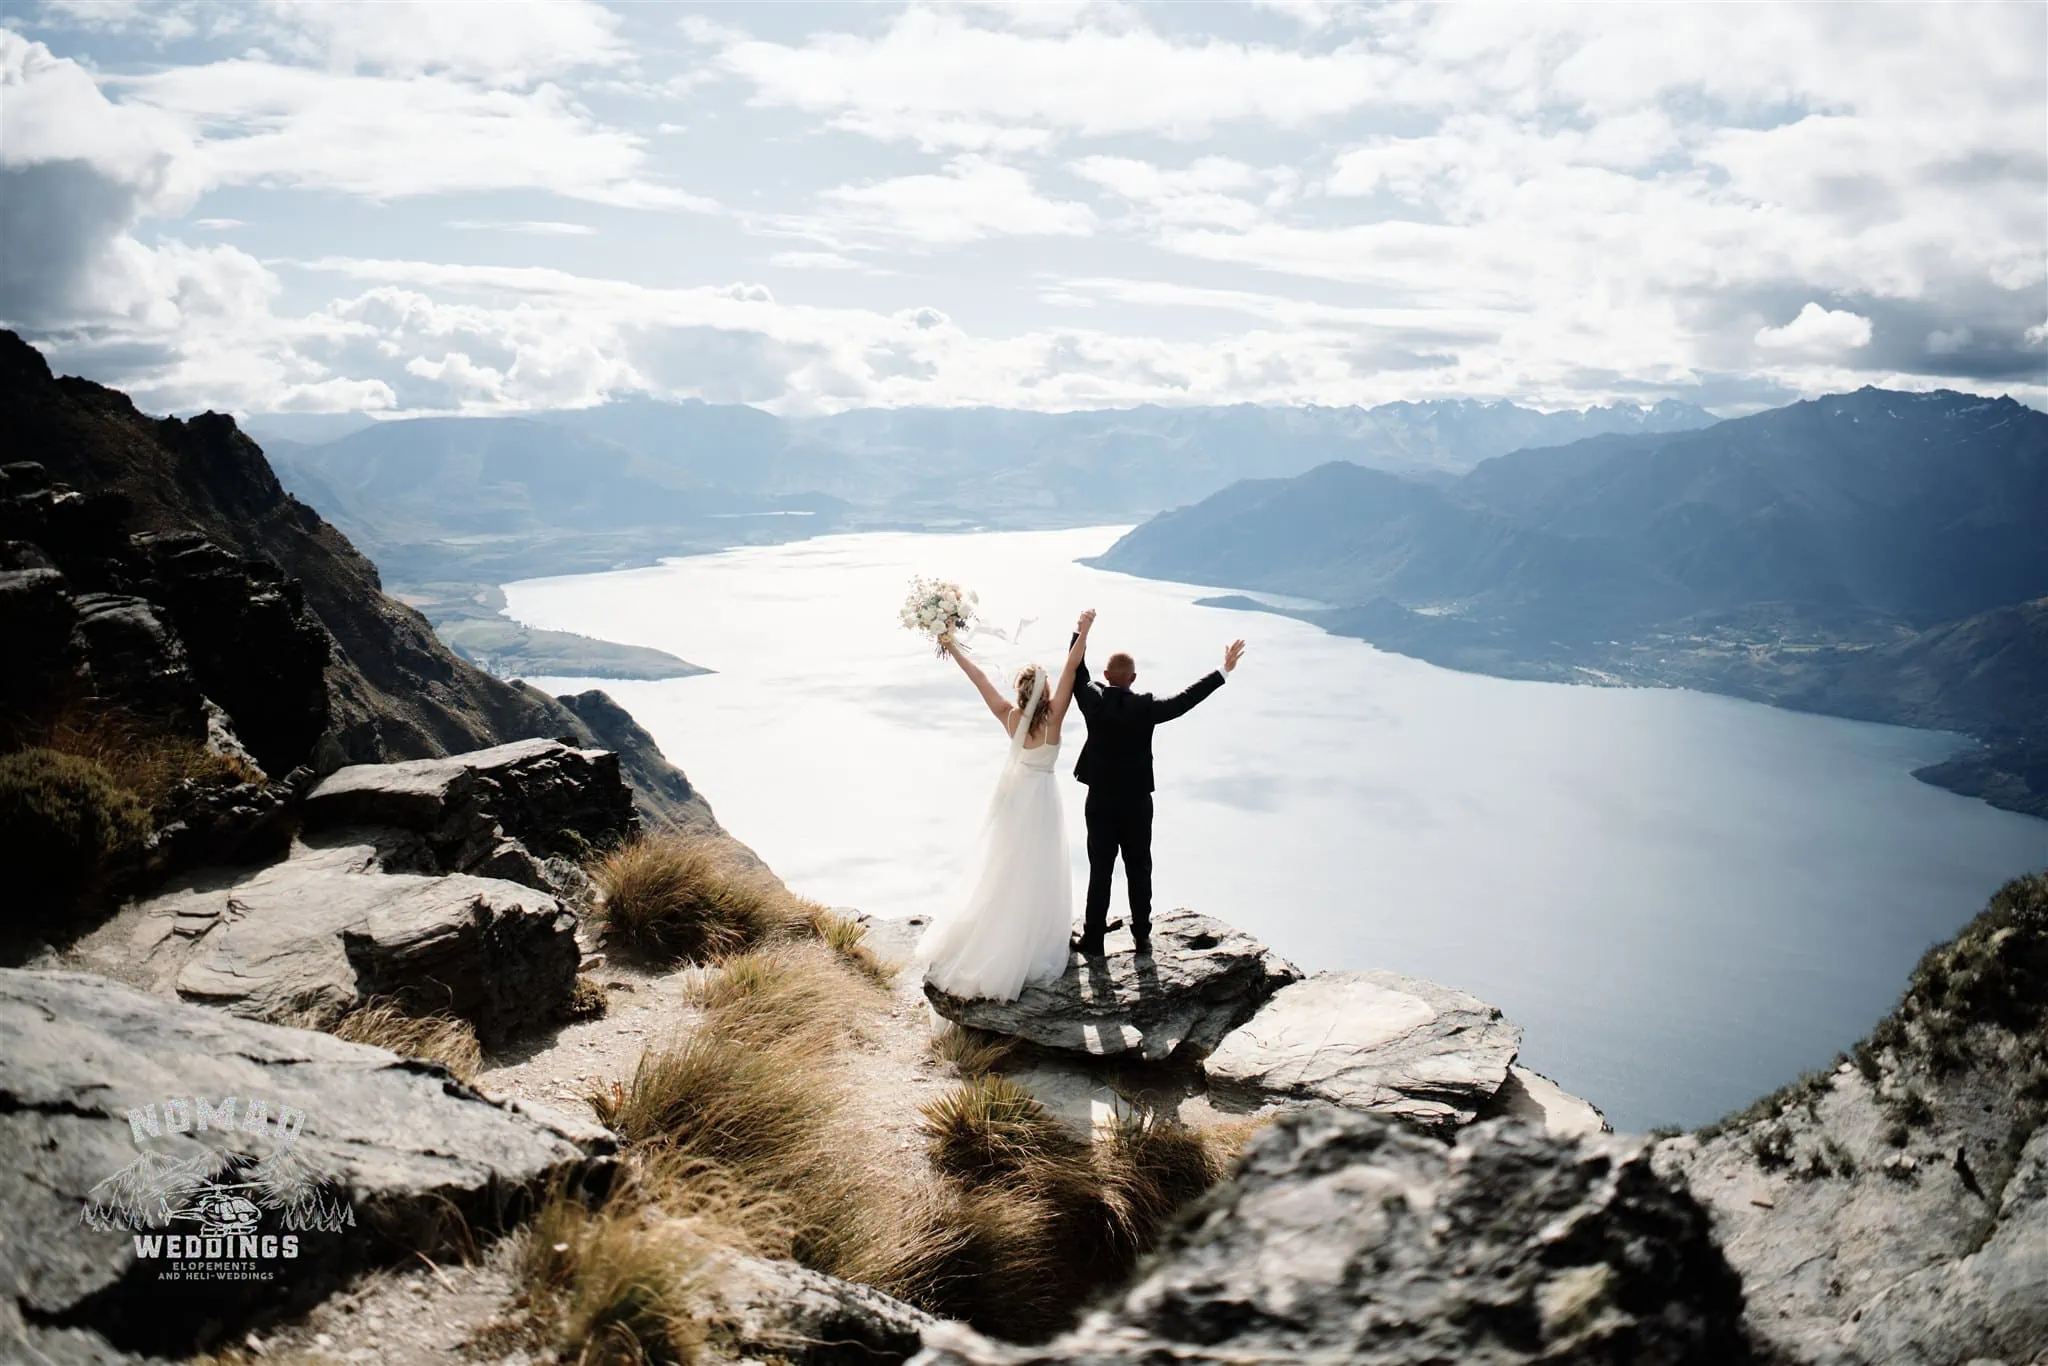 Amy and Michael have a breathtaking Heli Wedding on the Ledge of Cecil Peak, with stunning views of Lake Wanaka.